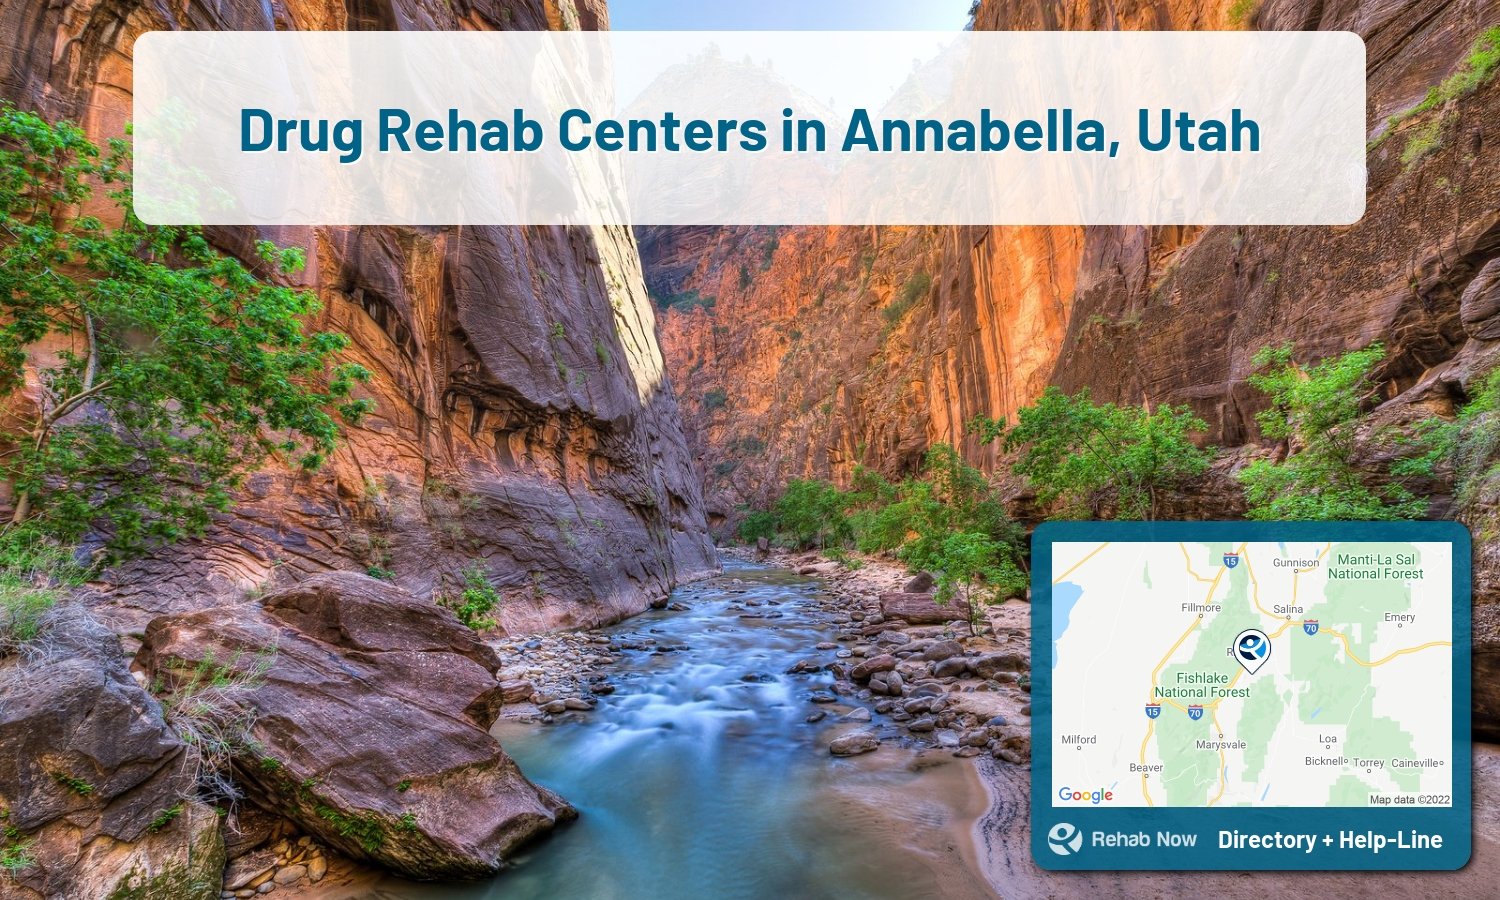 Find drug rehab and alcohol treatment services in Annabella. Our experts help you find a center in Annabella, Utah